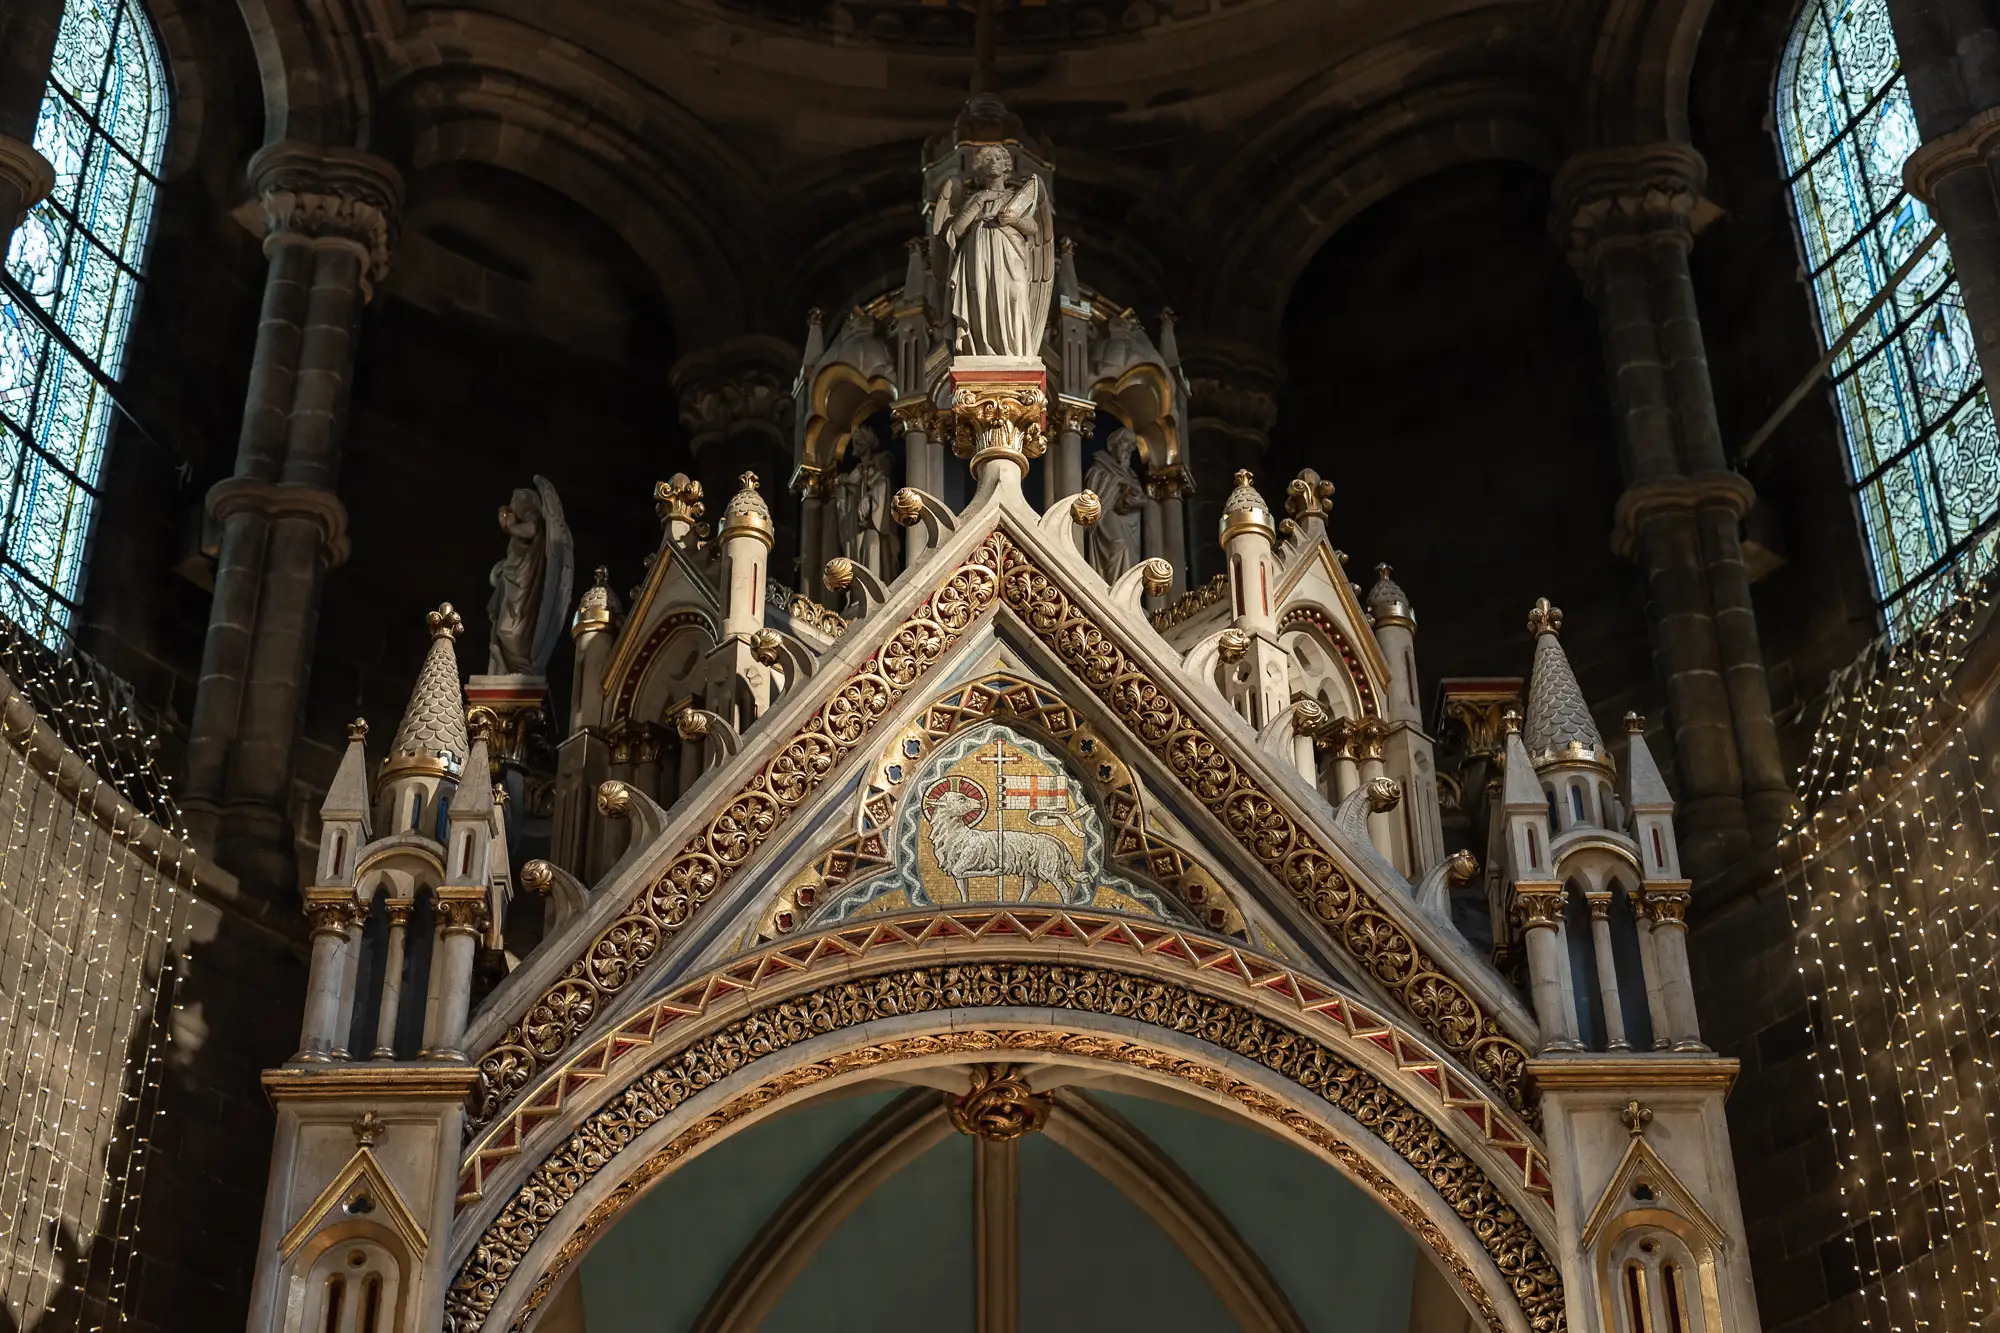 Ornate gothic arch inside a cathedral featuring sculptures, intricate patterns, and a lamb relief in the center.